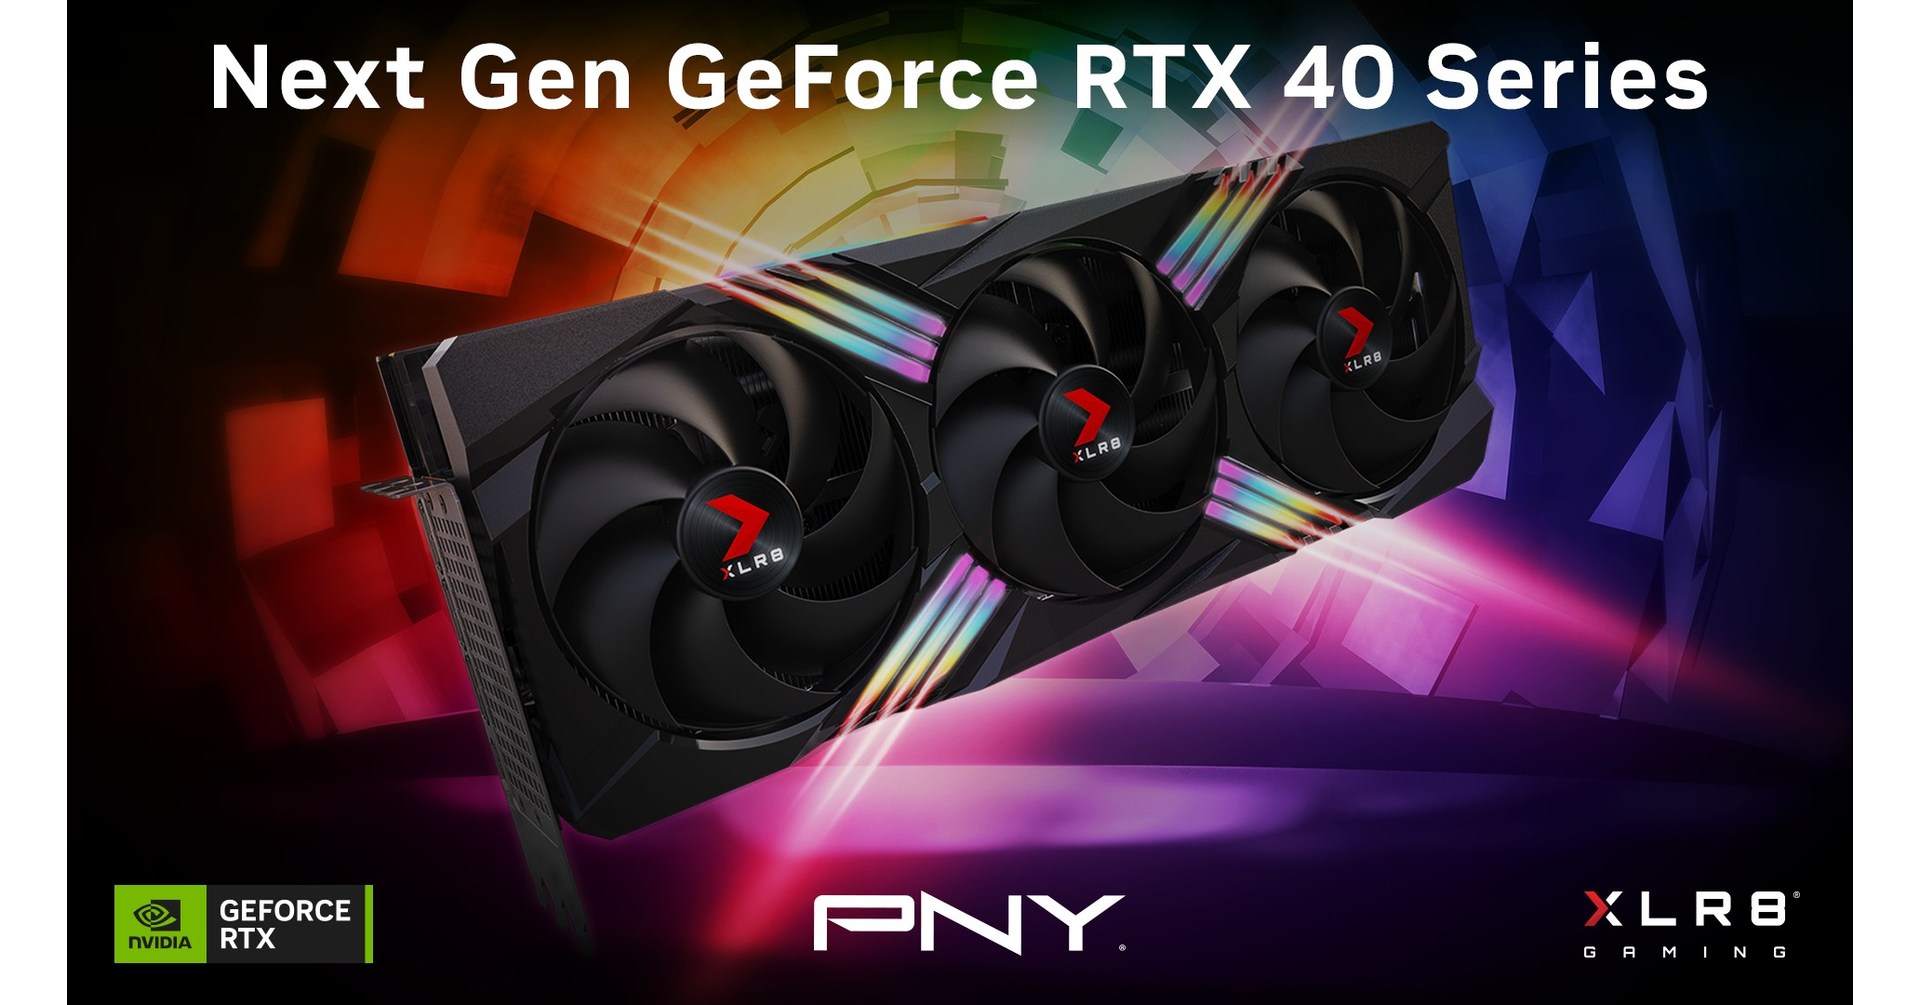 GeForce RTX 4080 Super Breaks Cover In Update To A Popular System